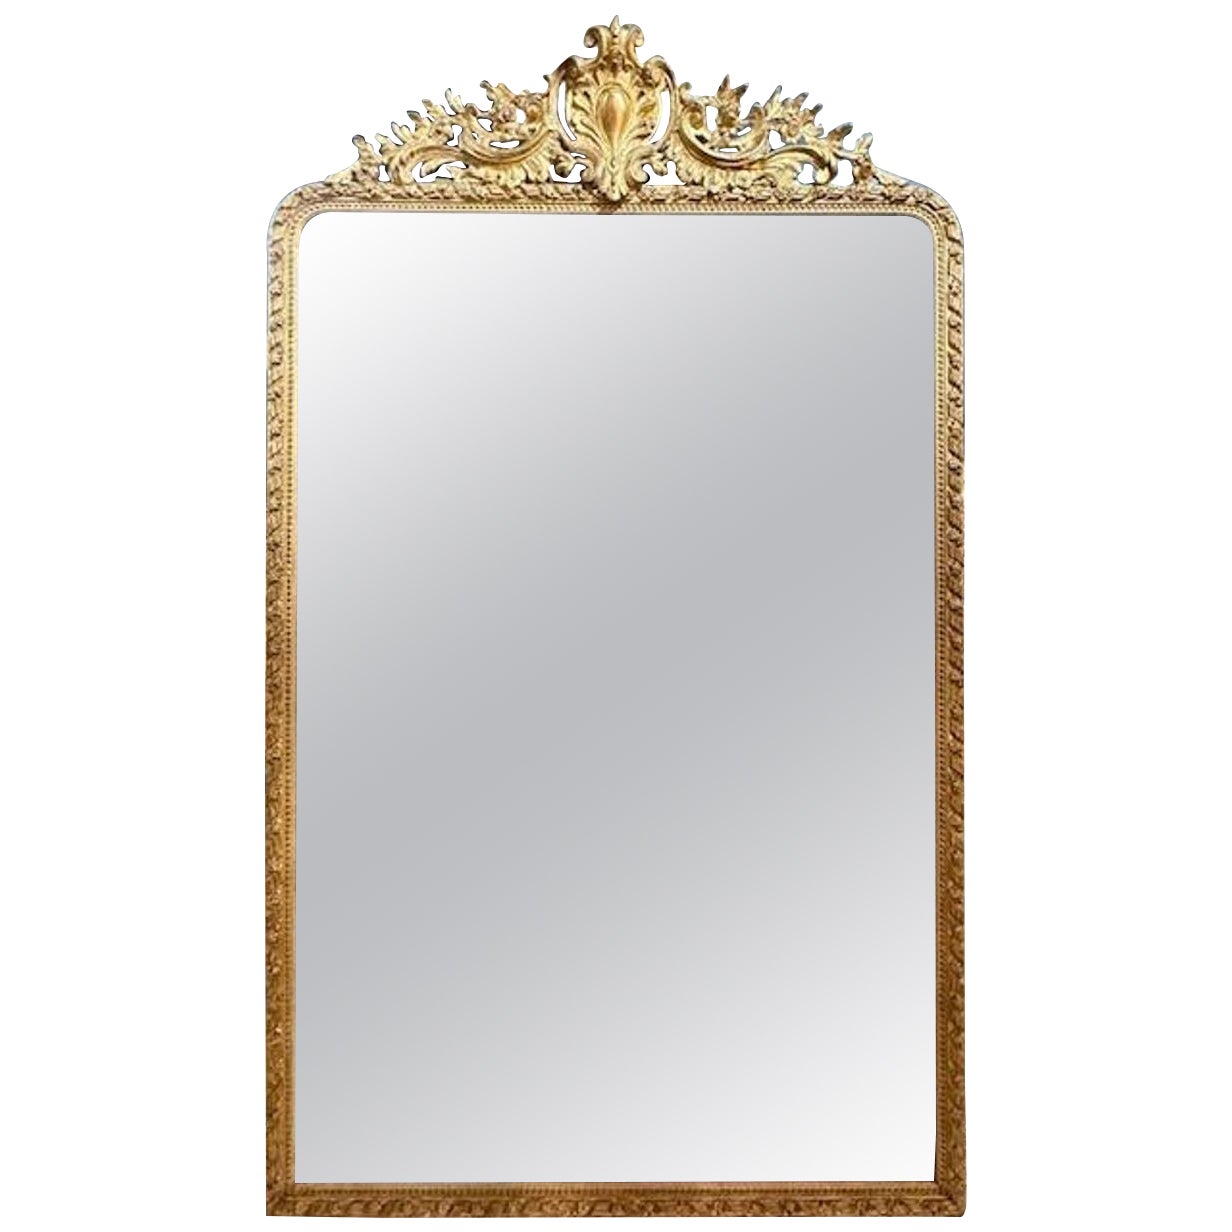 Empire Giltwood Eglomise" Mirror For Sale